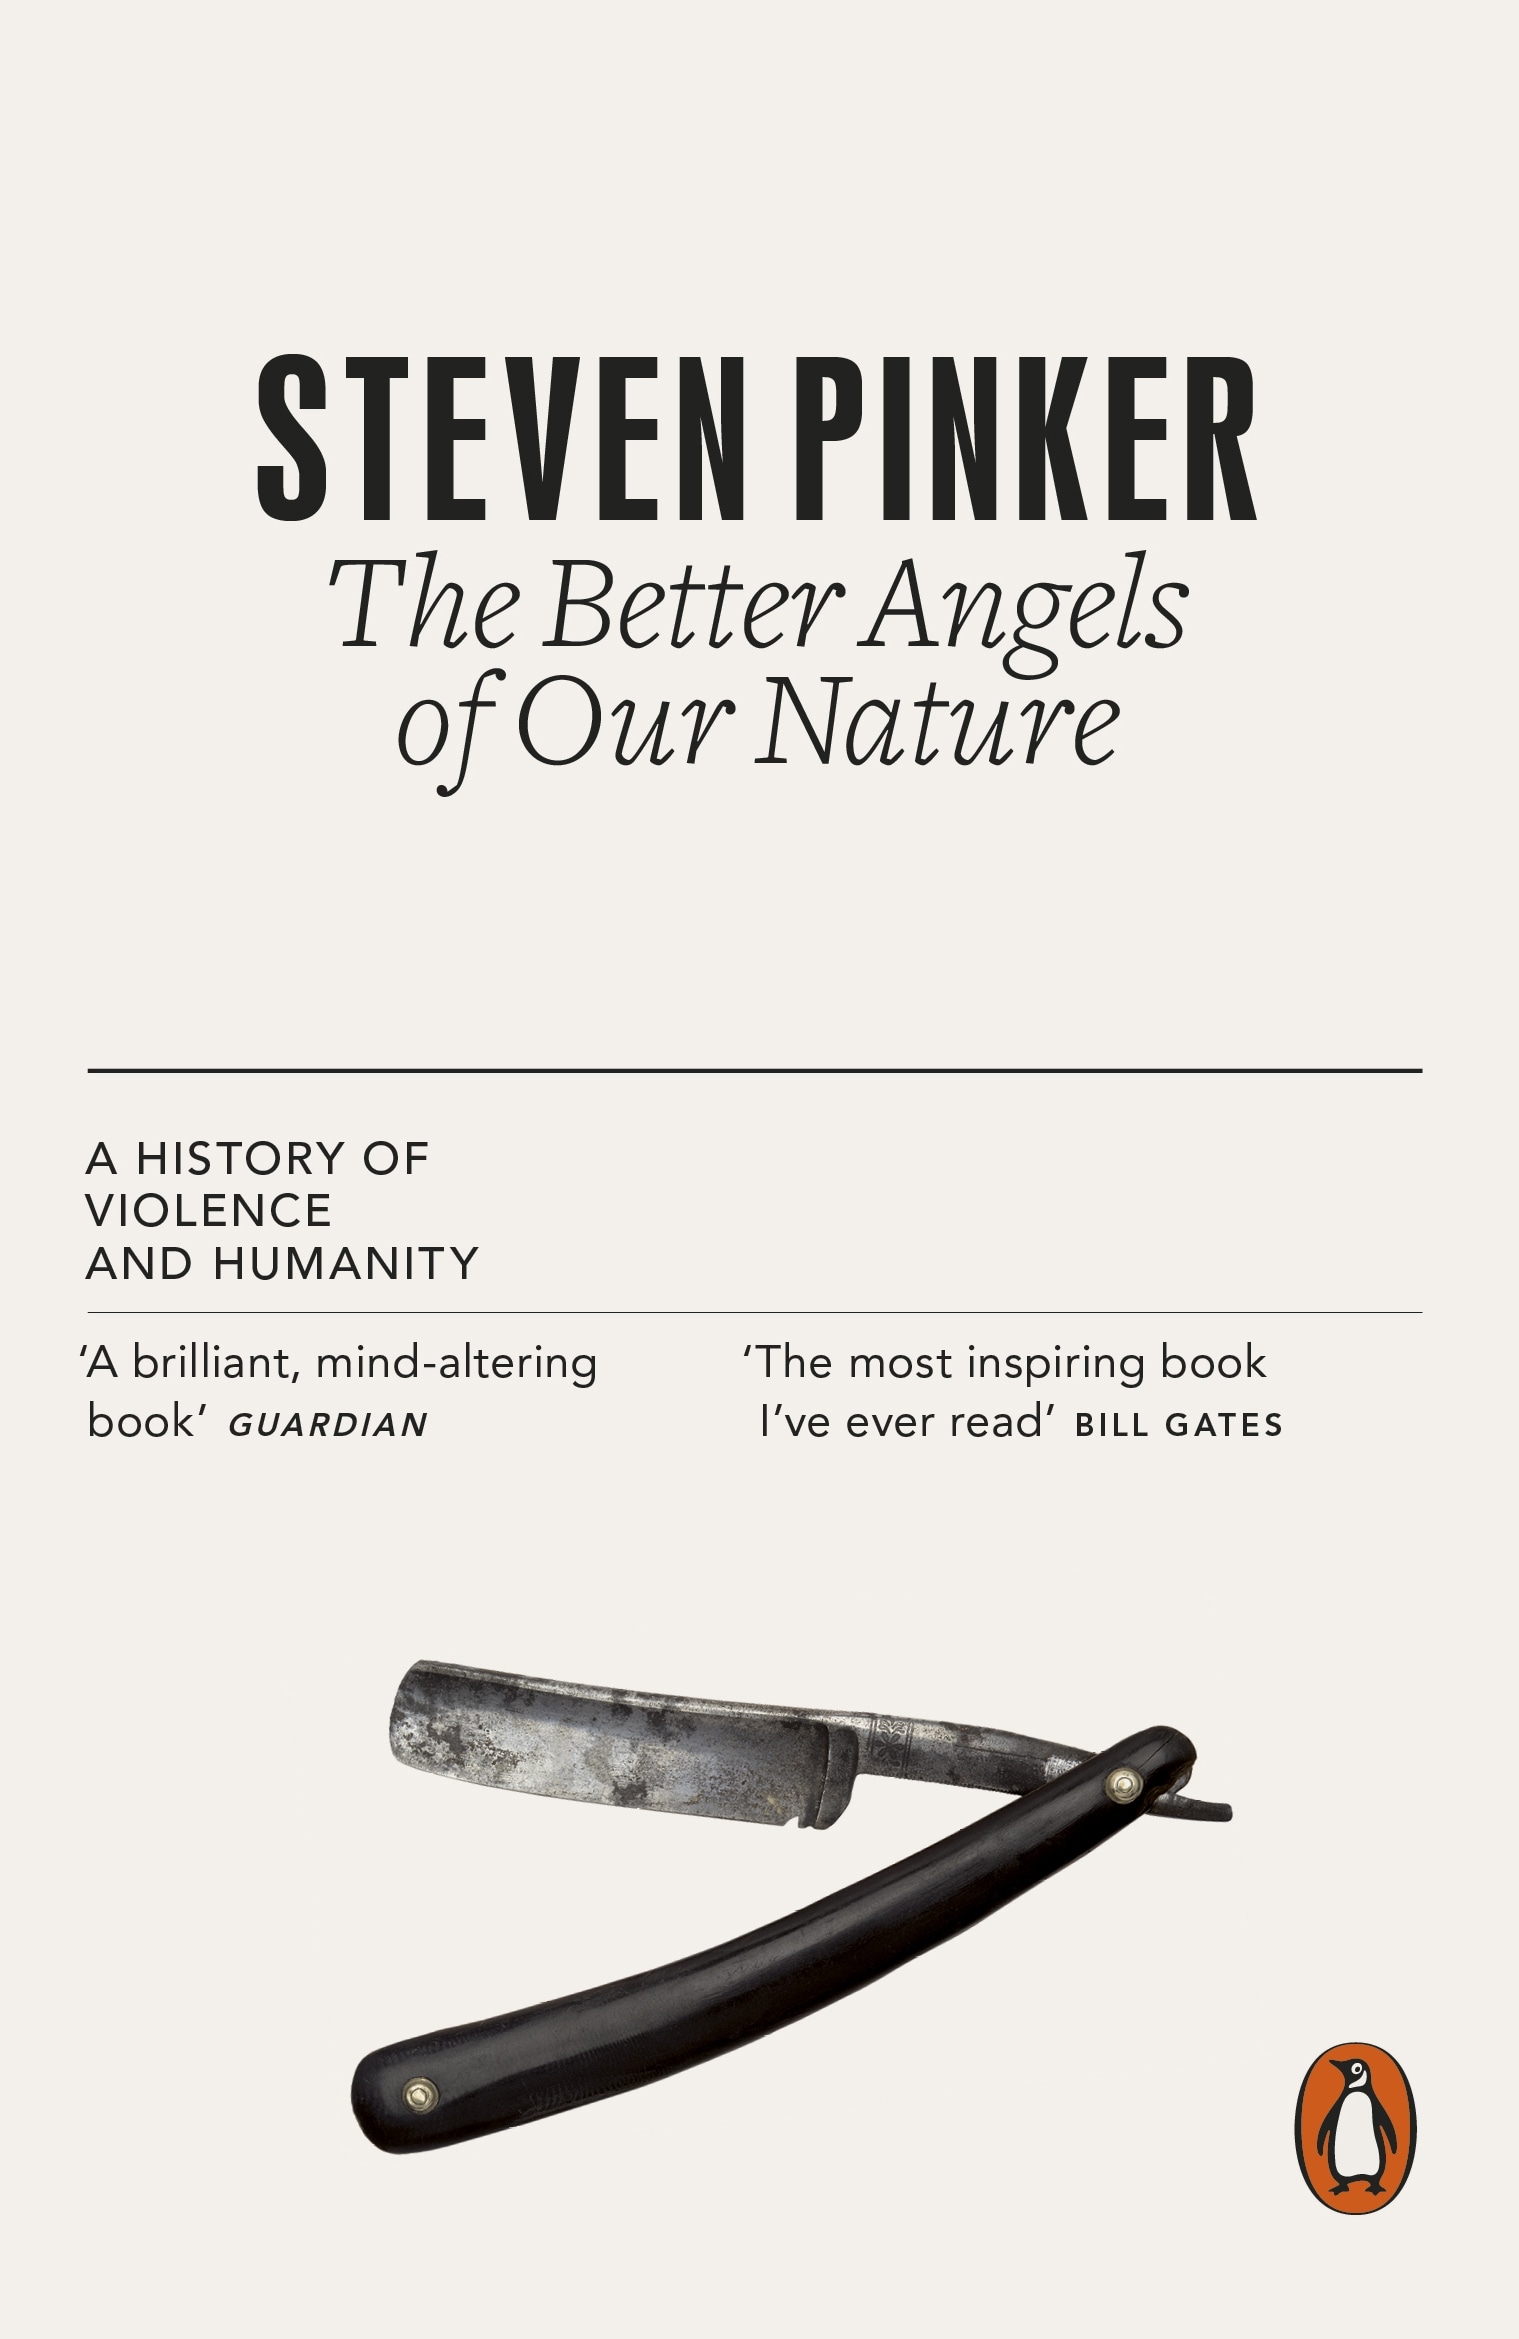 Book “The Better Angels of Our Nature” by Steven Pinker